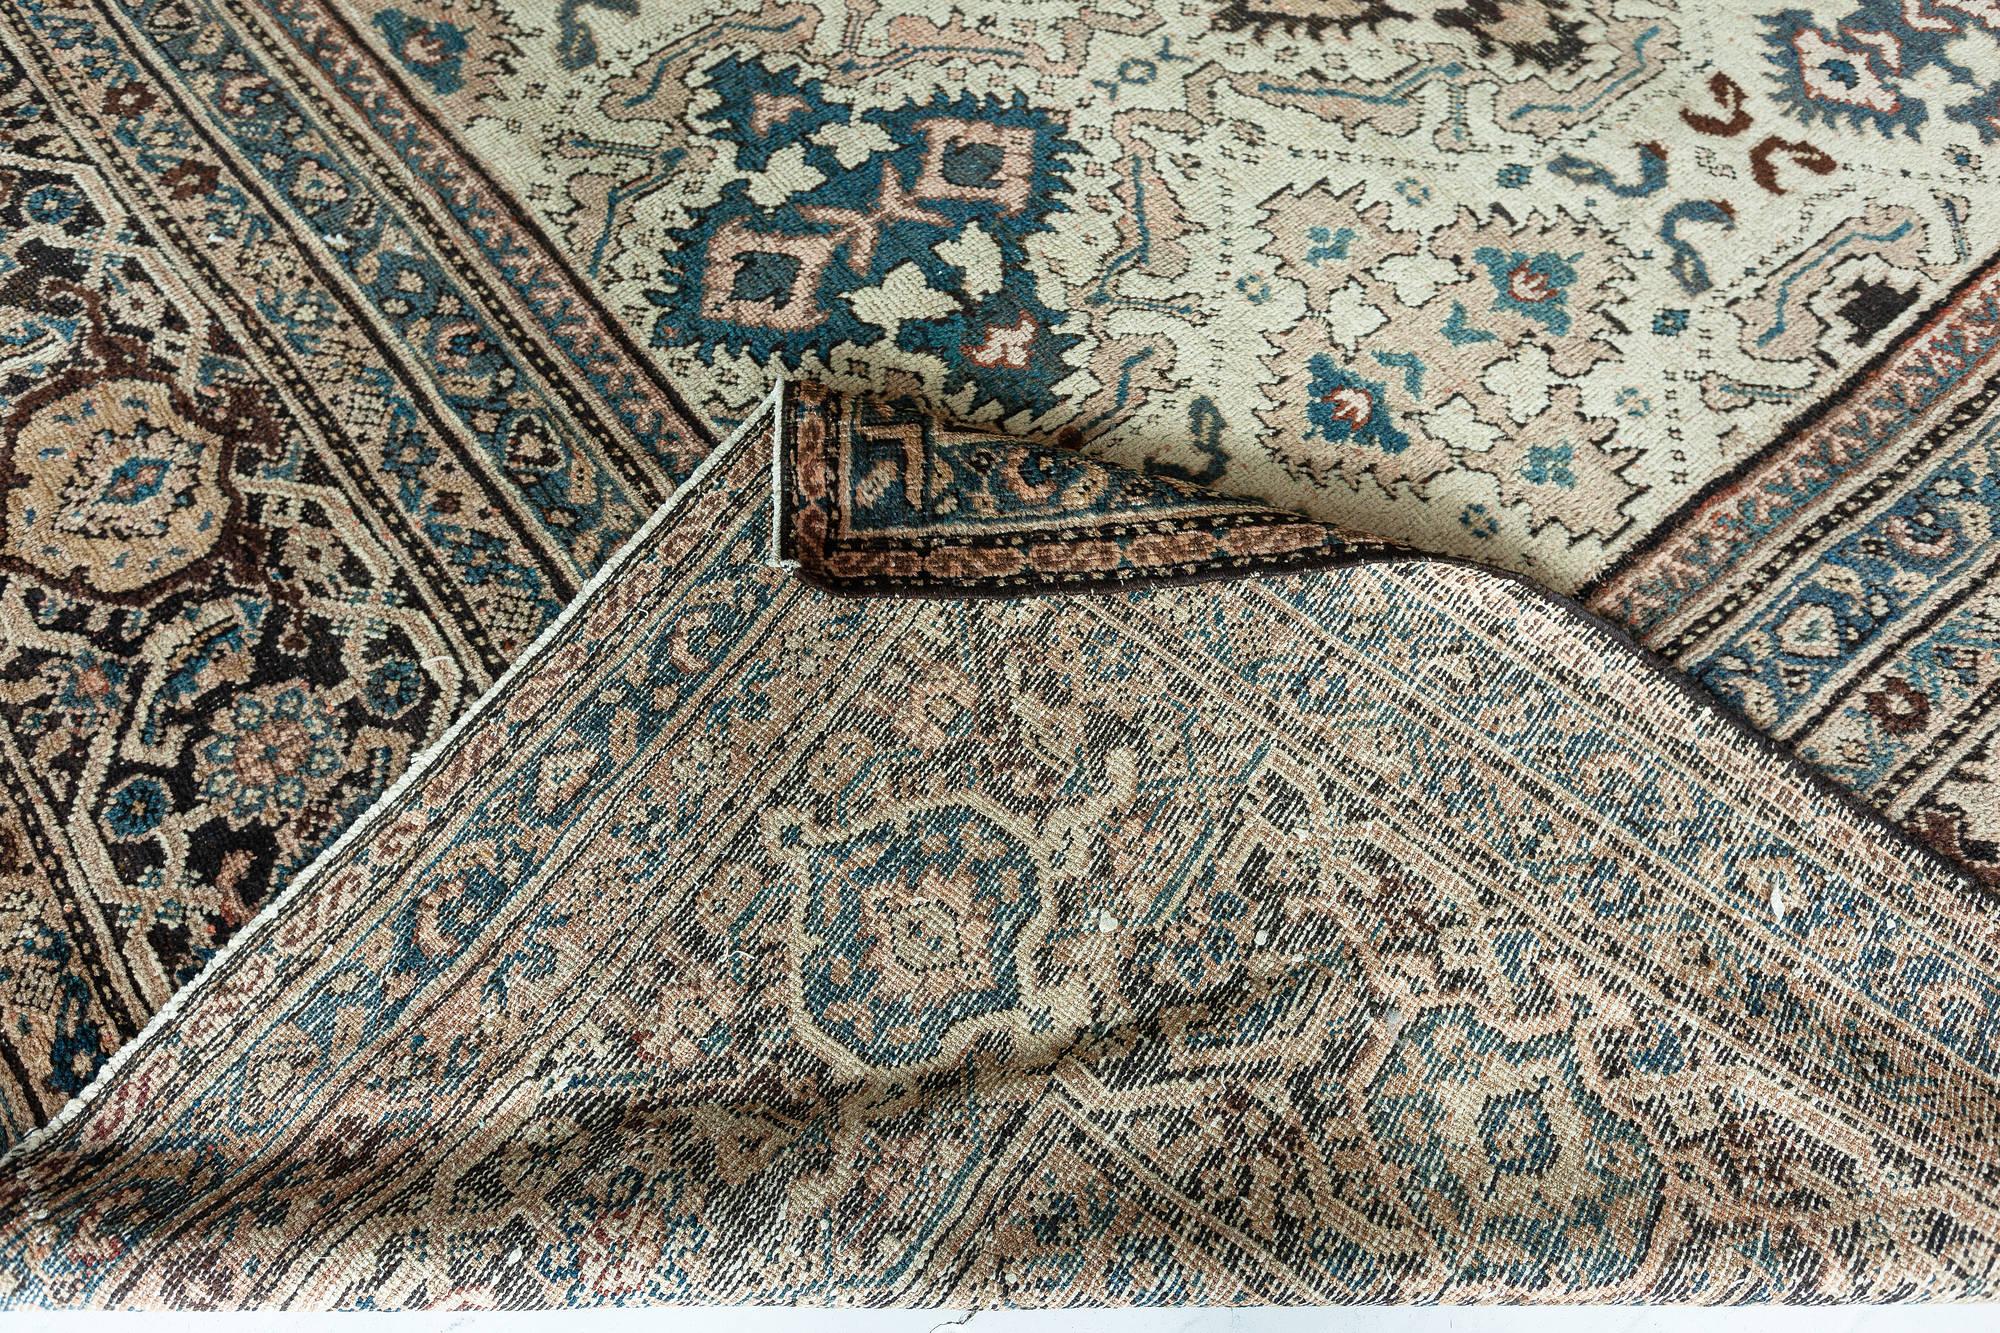 Authentic 19th Century Persian Sultanabad Handmade Wool Rug by Doris Leslie Blau
Size: 16'6